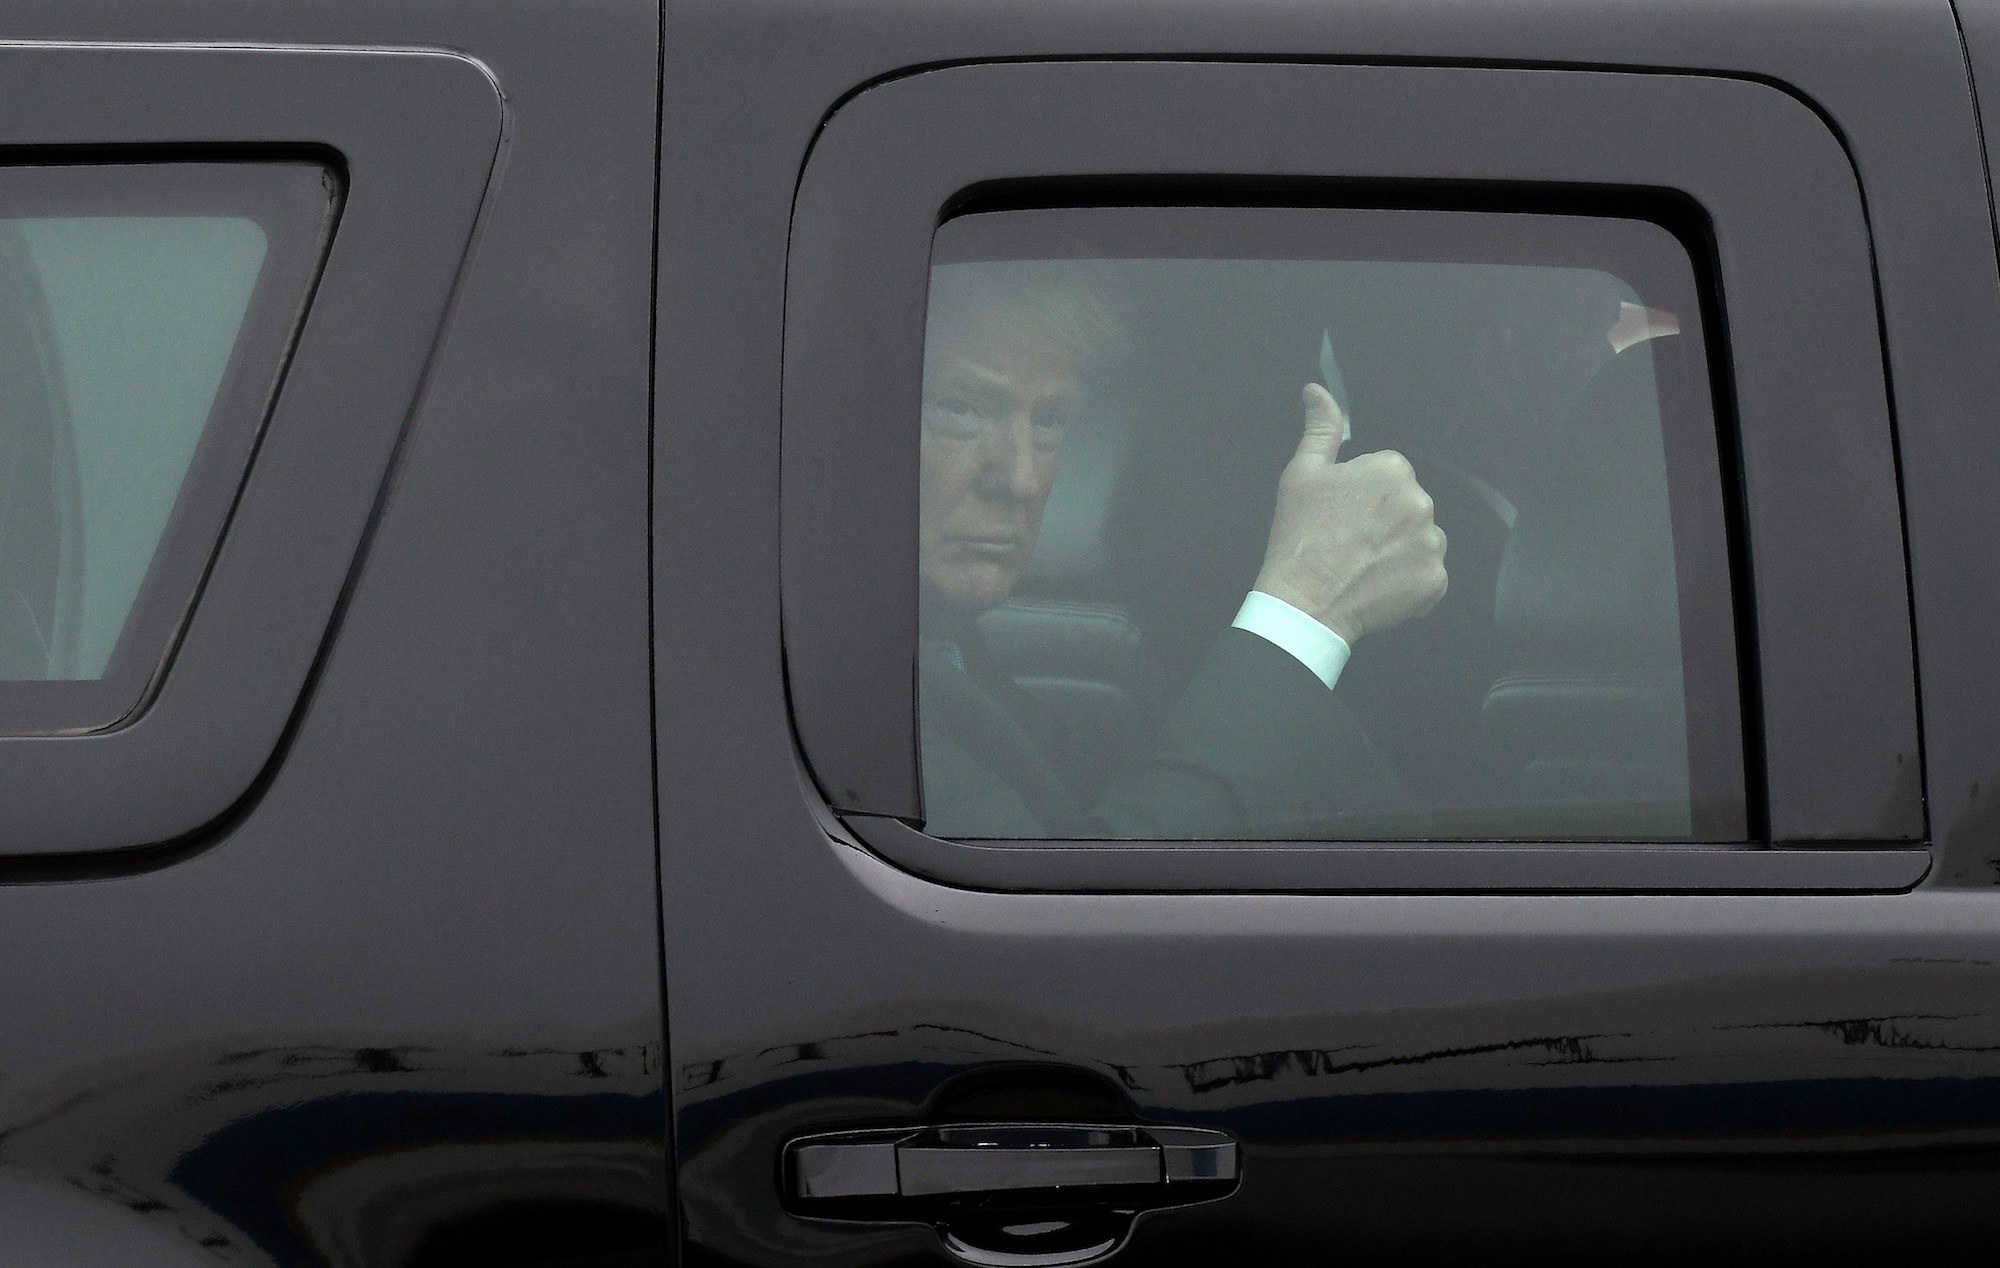 Donald Trump arrives on motoracde to board Air Force One